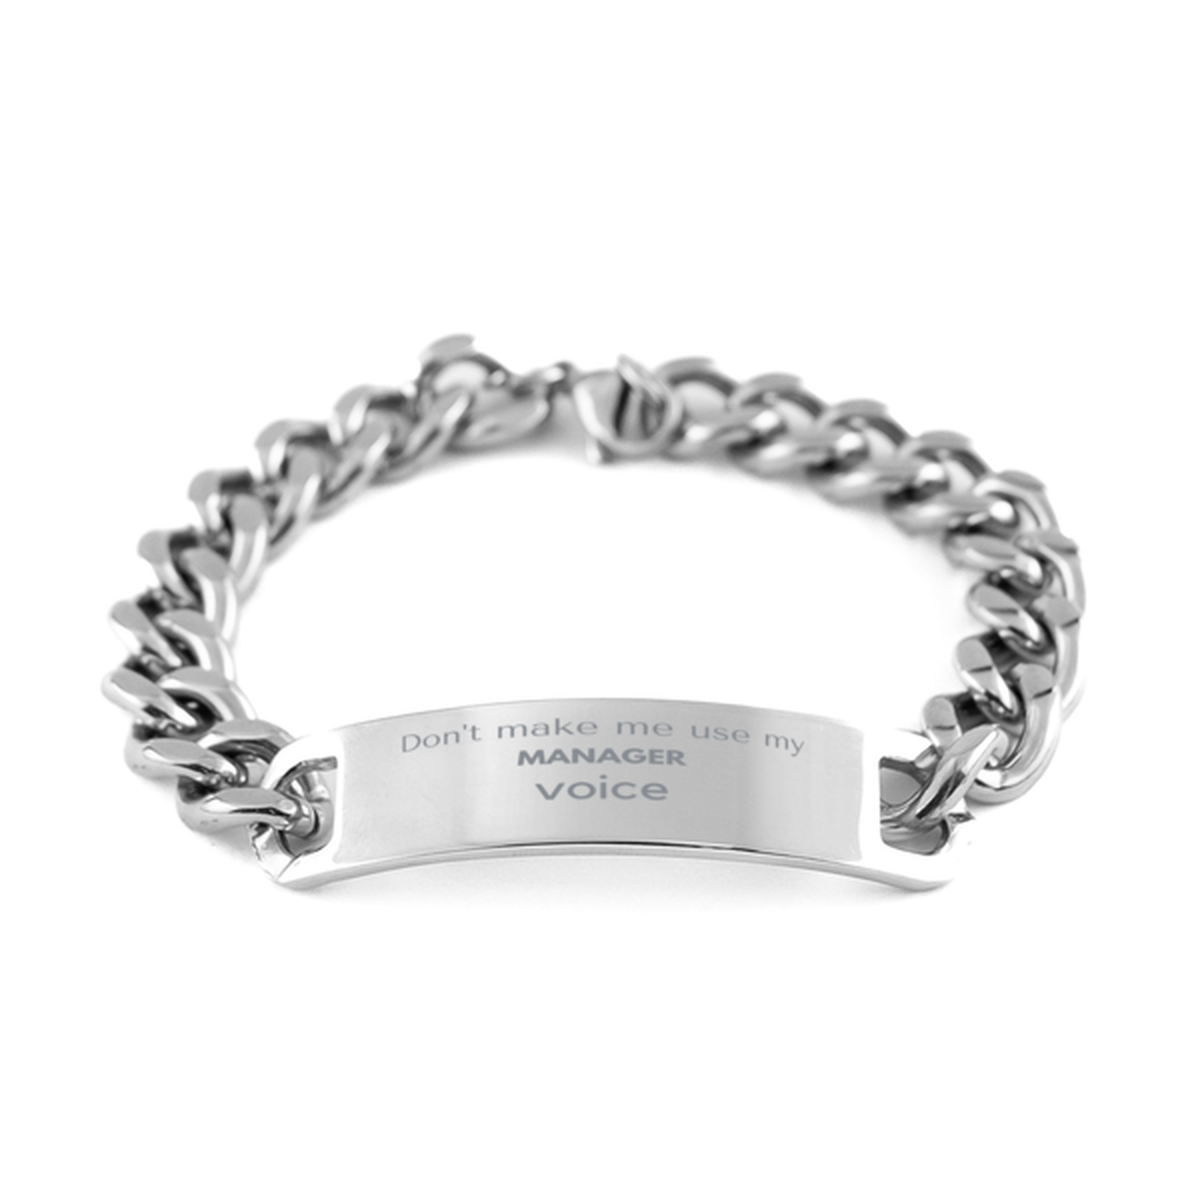 Don't make me use my Manager voice, Sarcasm Manager Gifts, Christmas Manager Cuban Chain Stainless Steel Bracelet Birthday Unique Gifts For Manager Coworkers, Men, Women, Colleague, Friends